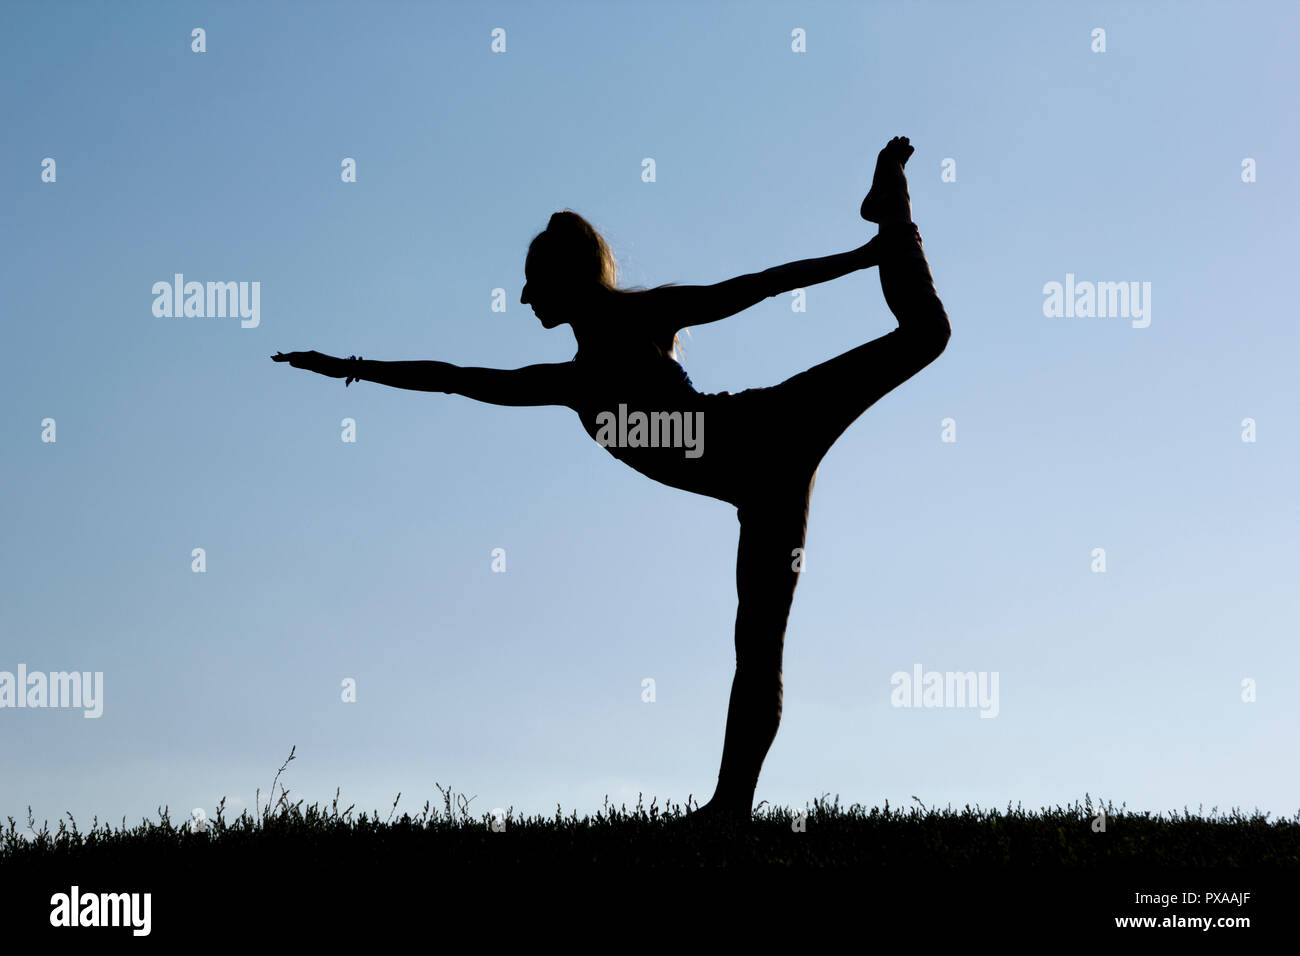 A young woman is meditating in nature. Girl doing yoga in the park. Healthy lifestyle. Stock Photo